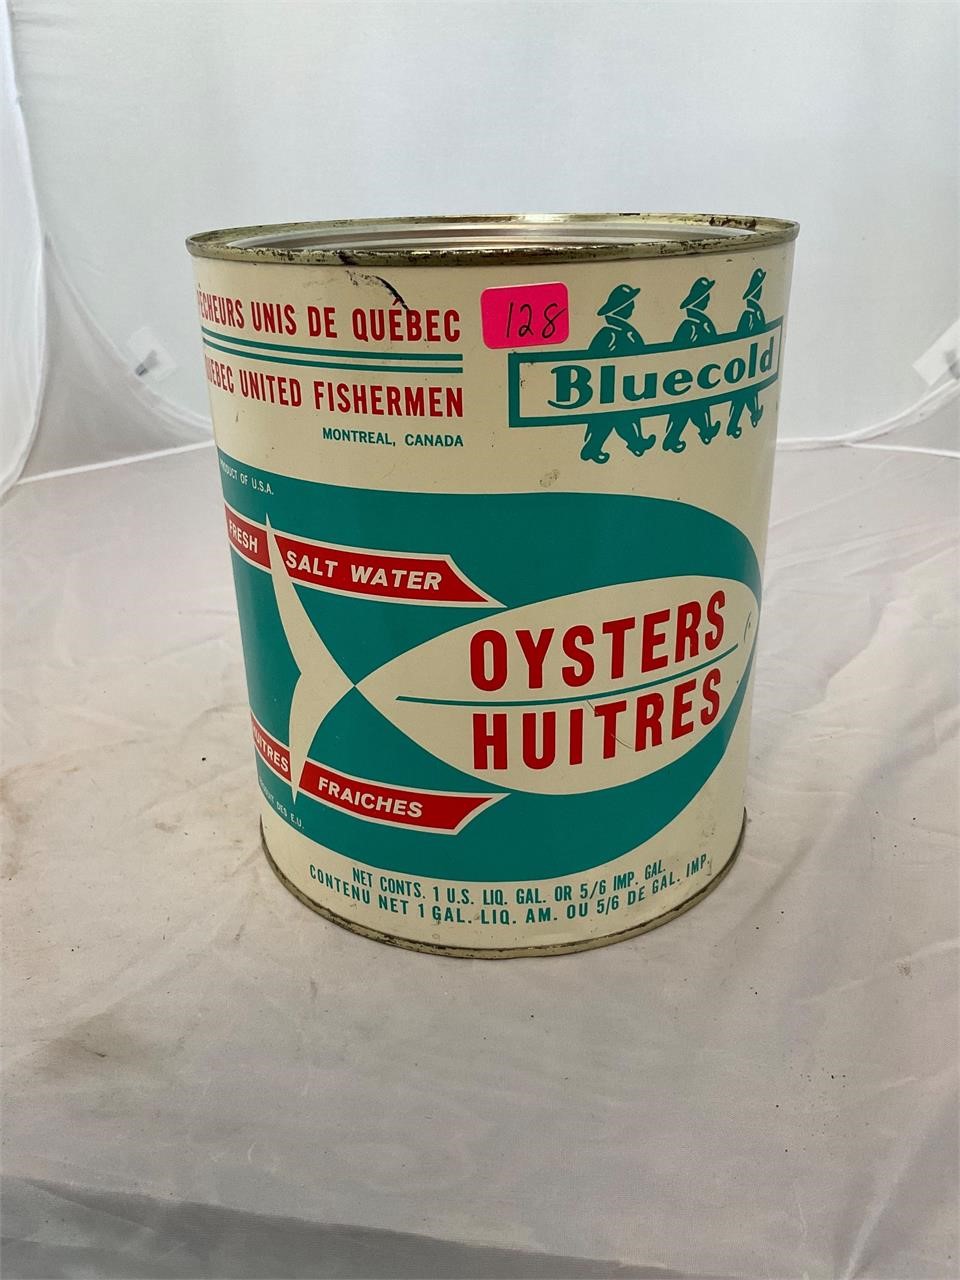 Bluecold Oysters Huitres Montreal Canada Gallon